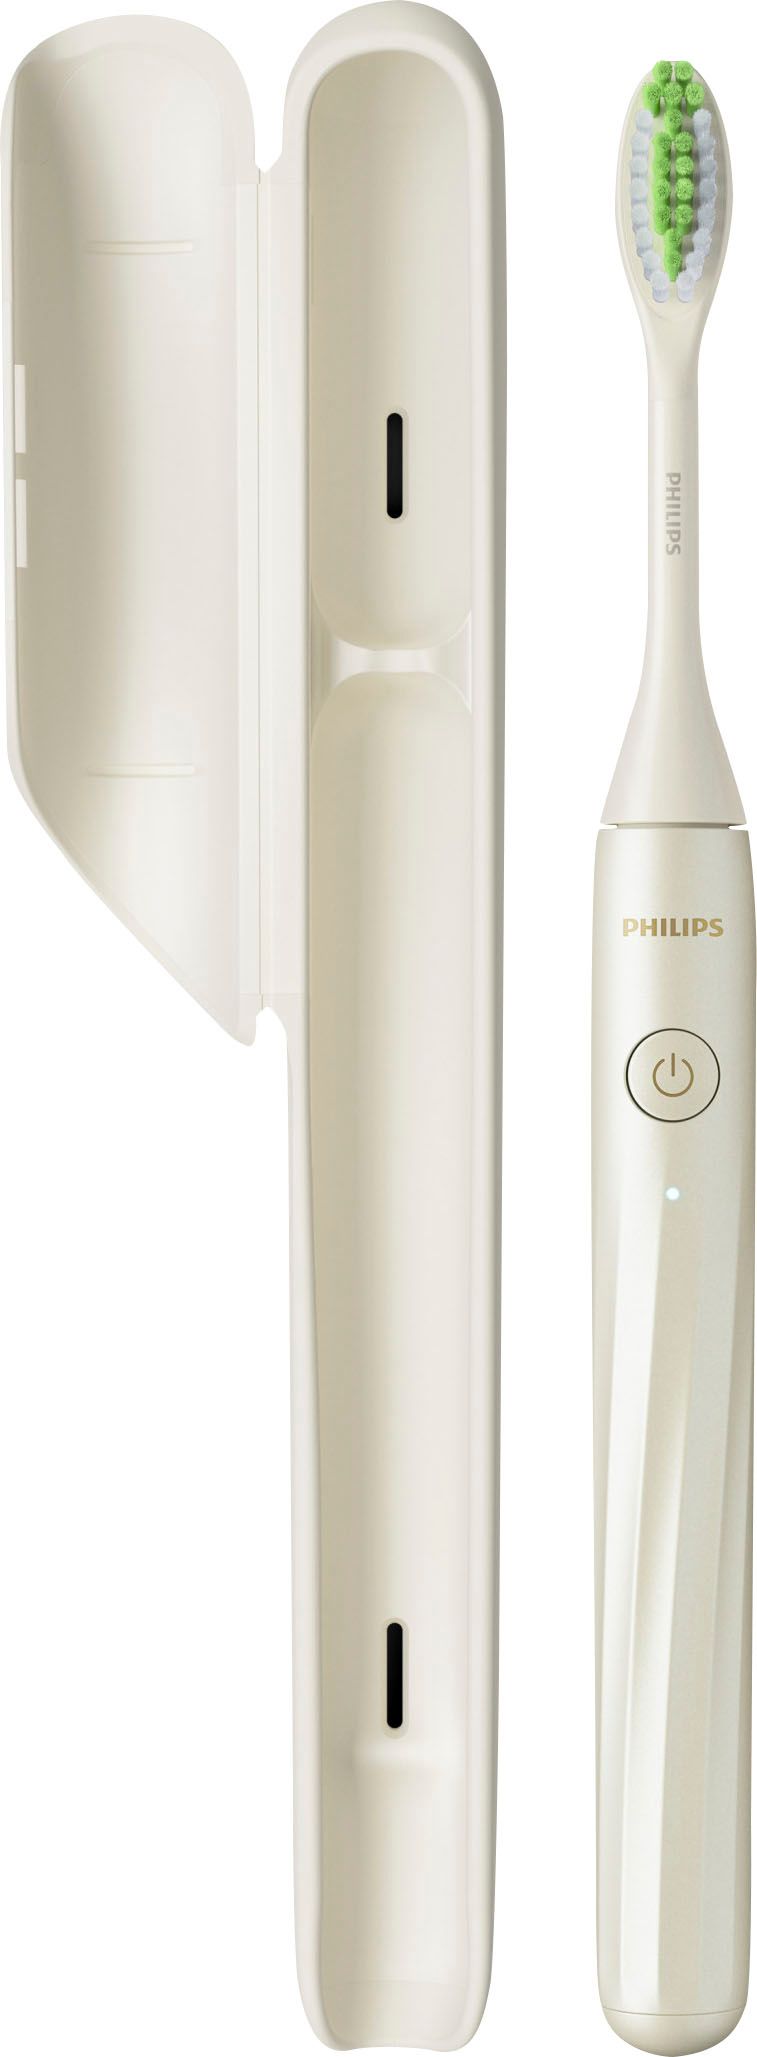 Philips Sonicare Philips One by Sonicare Rechargeable Toothbrush Snow HY1200/07 - Best Buy | Best Buy U.S.